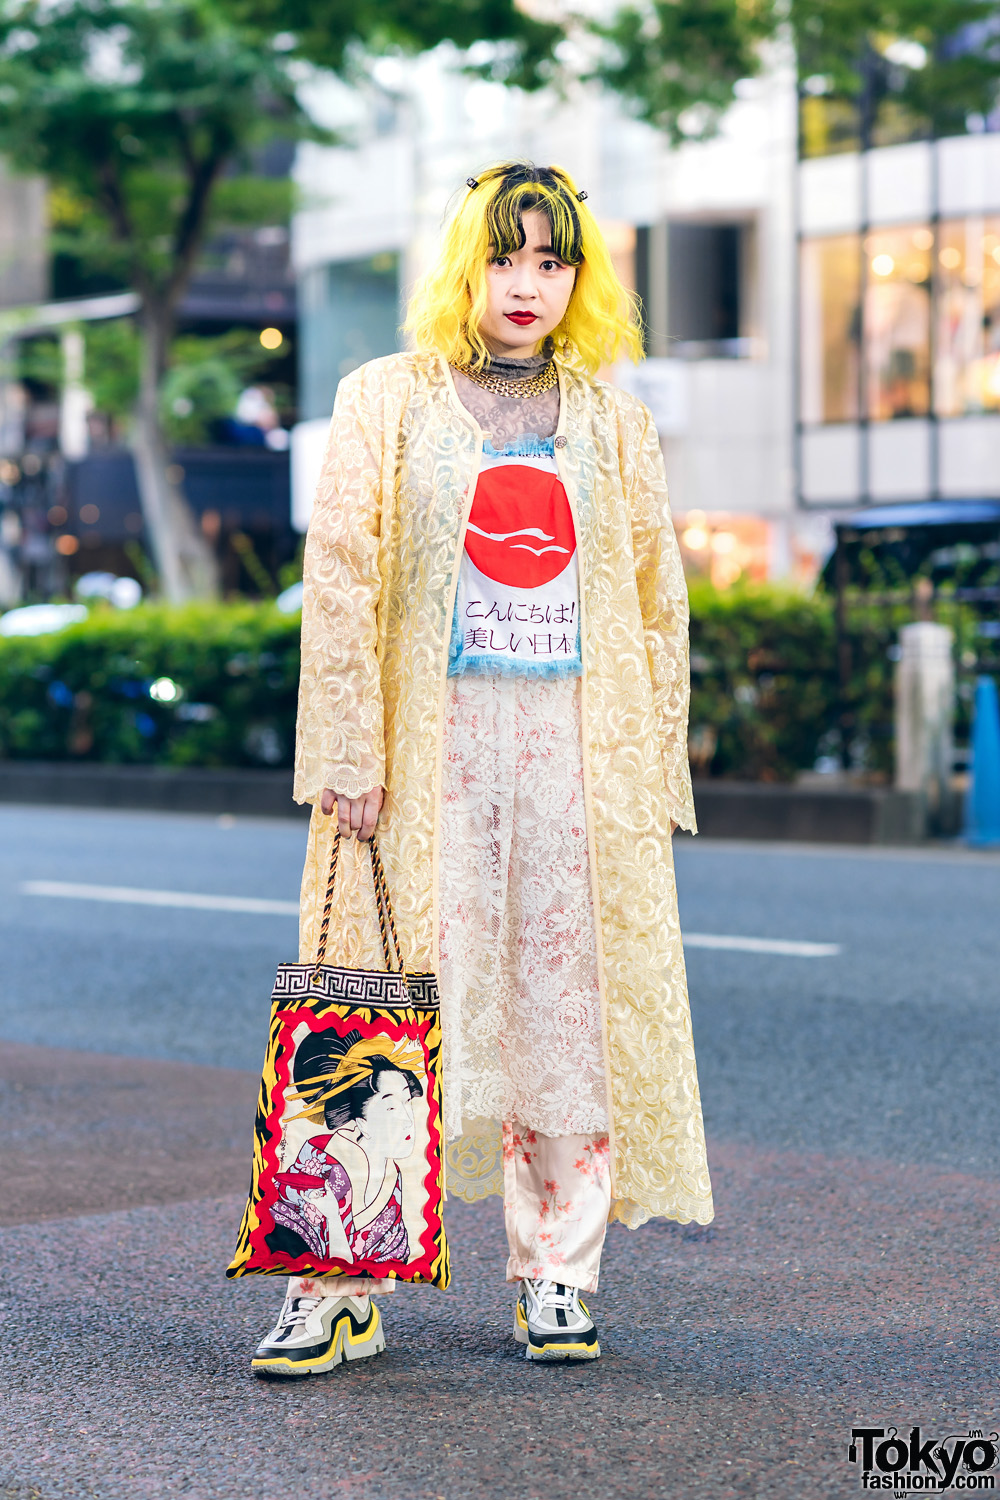 Tokyo Floral Lace Style w/ Handmade Graphic Print Bag & Pierre Hardy Sneakers